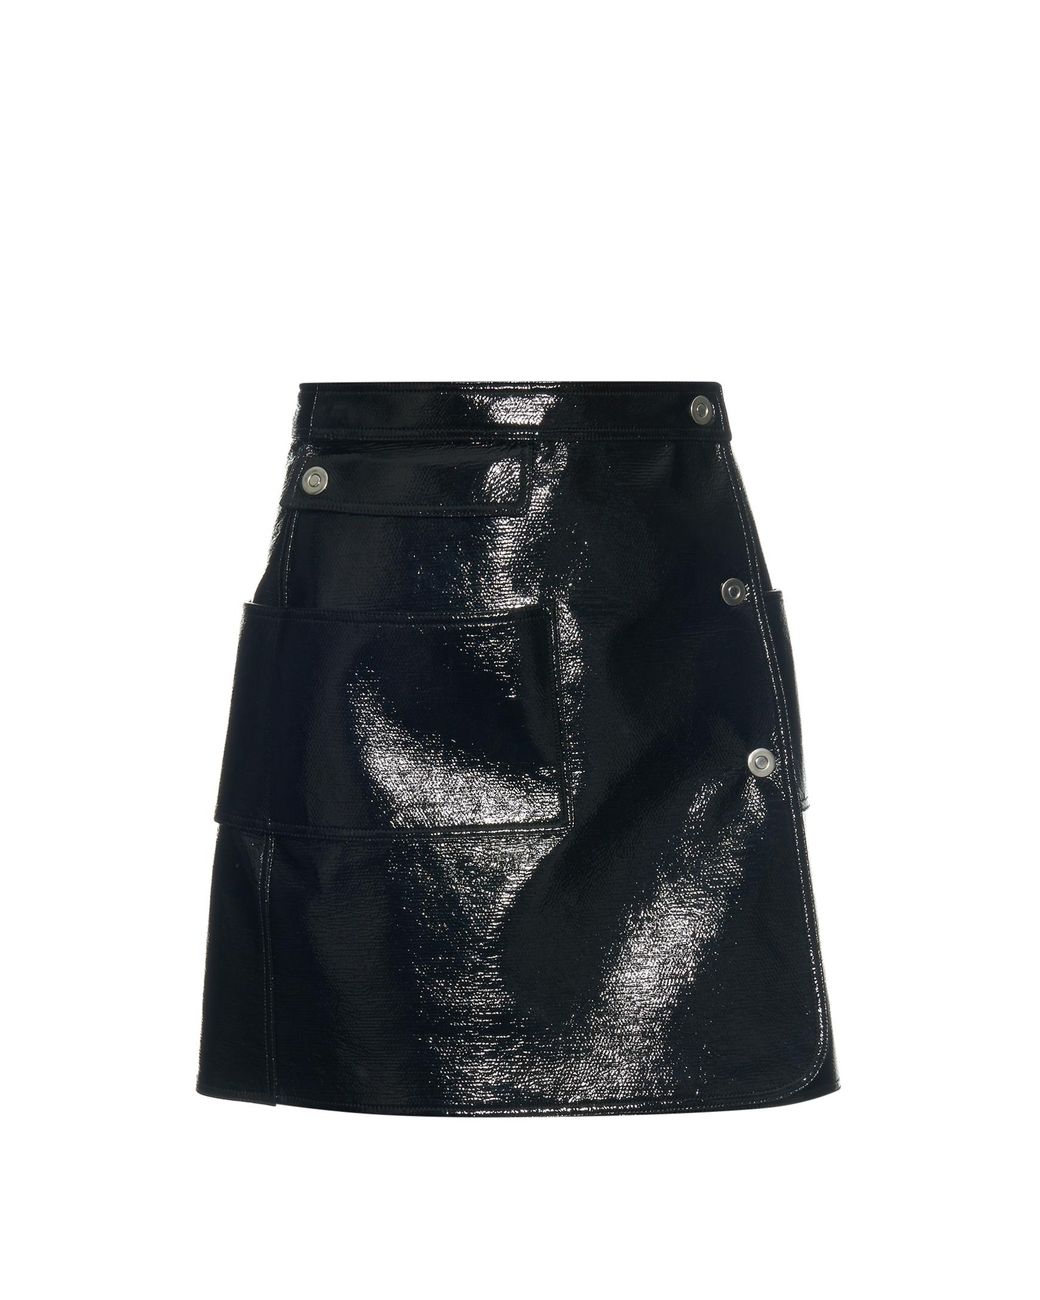 Courreges Patent-leather Mini Skirt in Black | Lyst